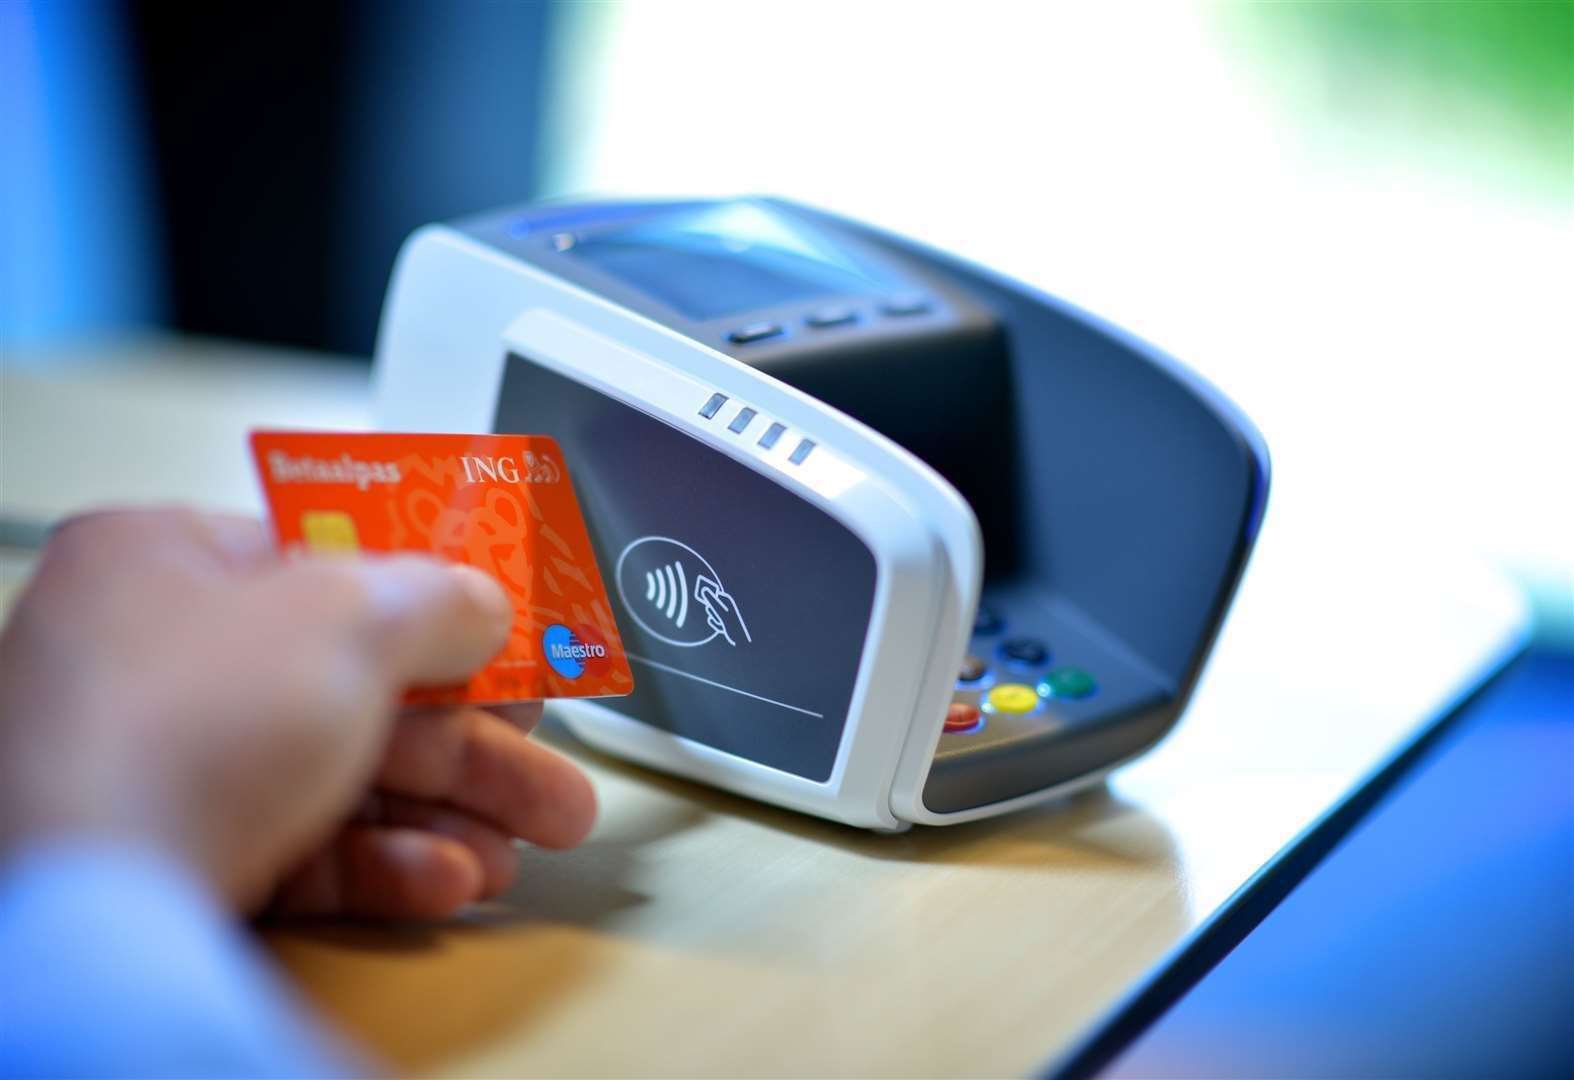 Contactless card payment limit will rise to £100 from today